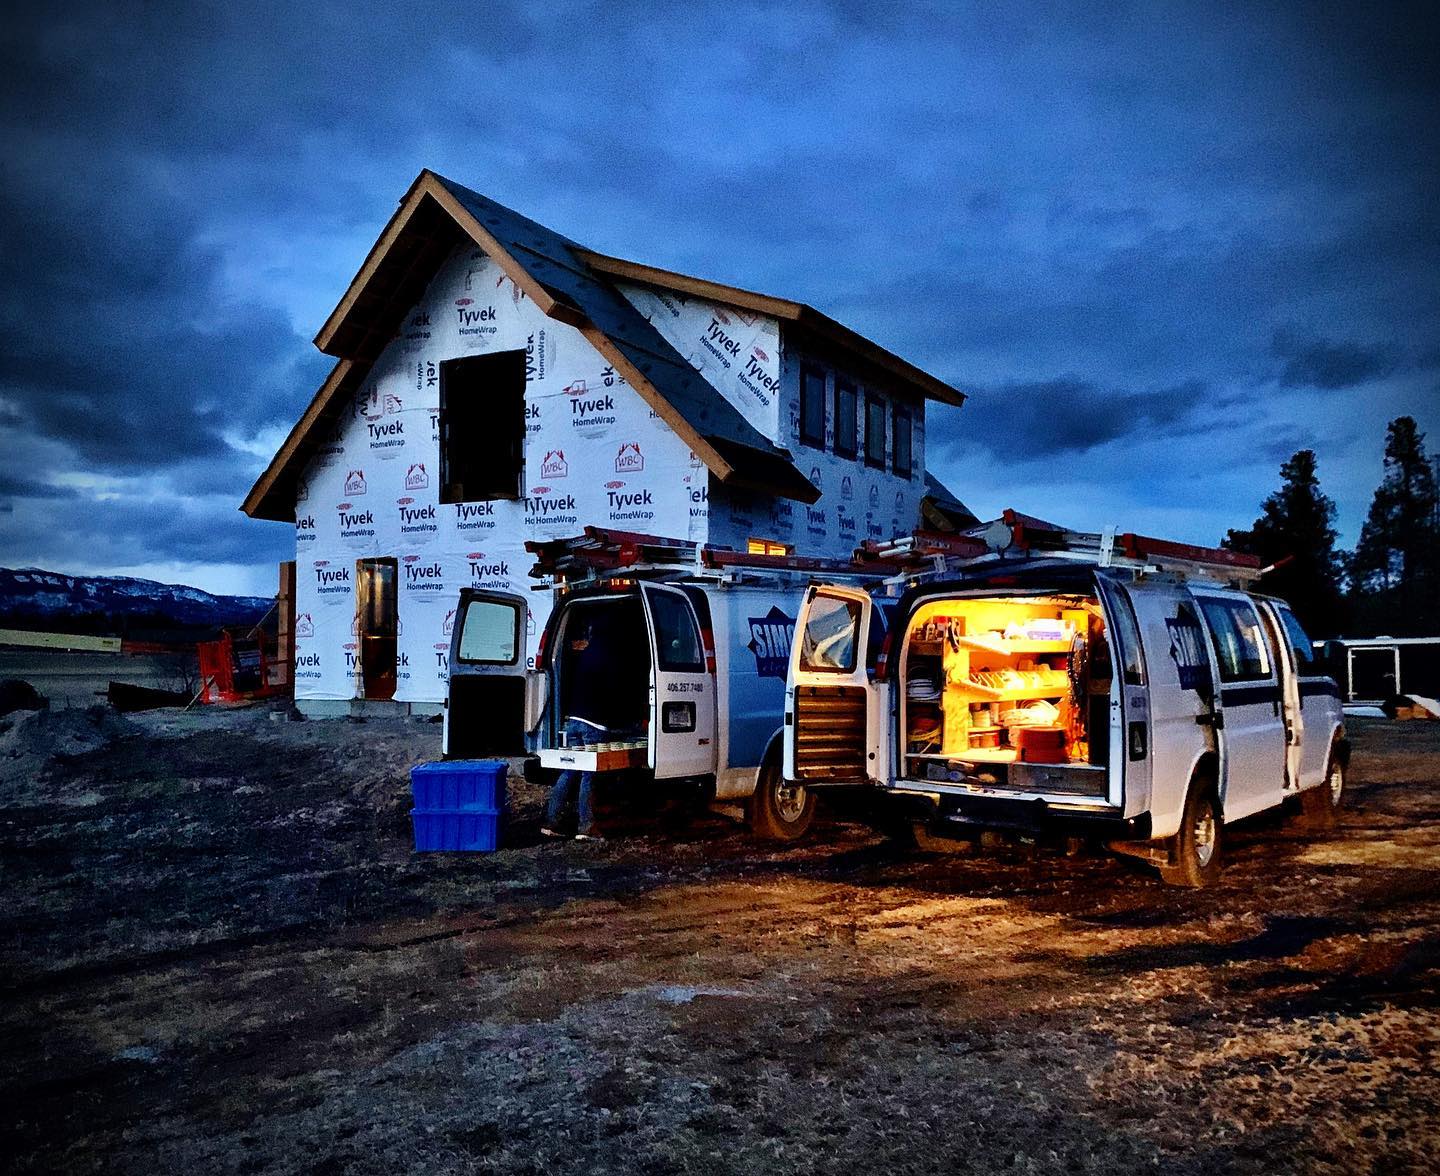 Nothing like finding your rockstar electricians working till dark because they told you’d they’d wire your project in a DAY and wanted to prove it. Mission accomplished. whitefish custom home builder